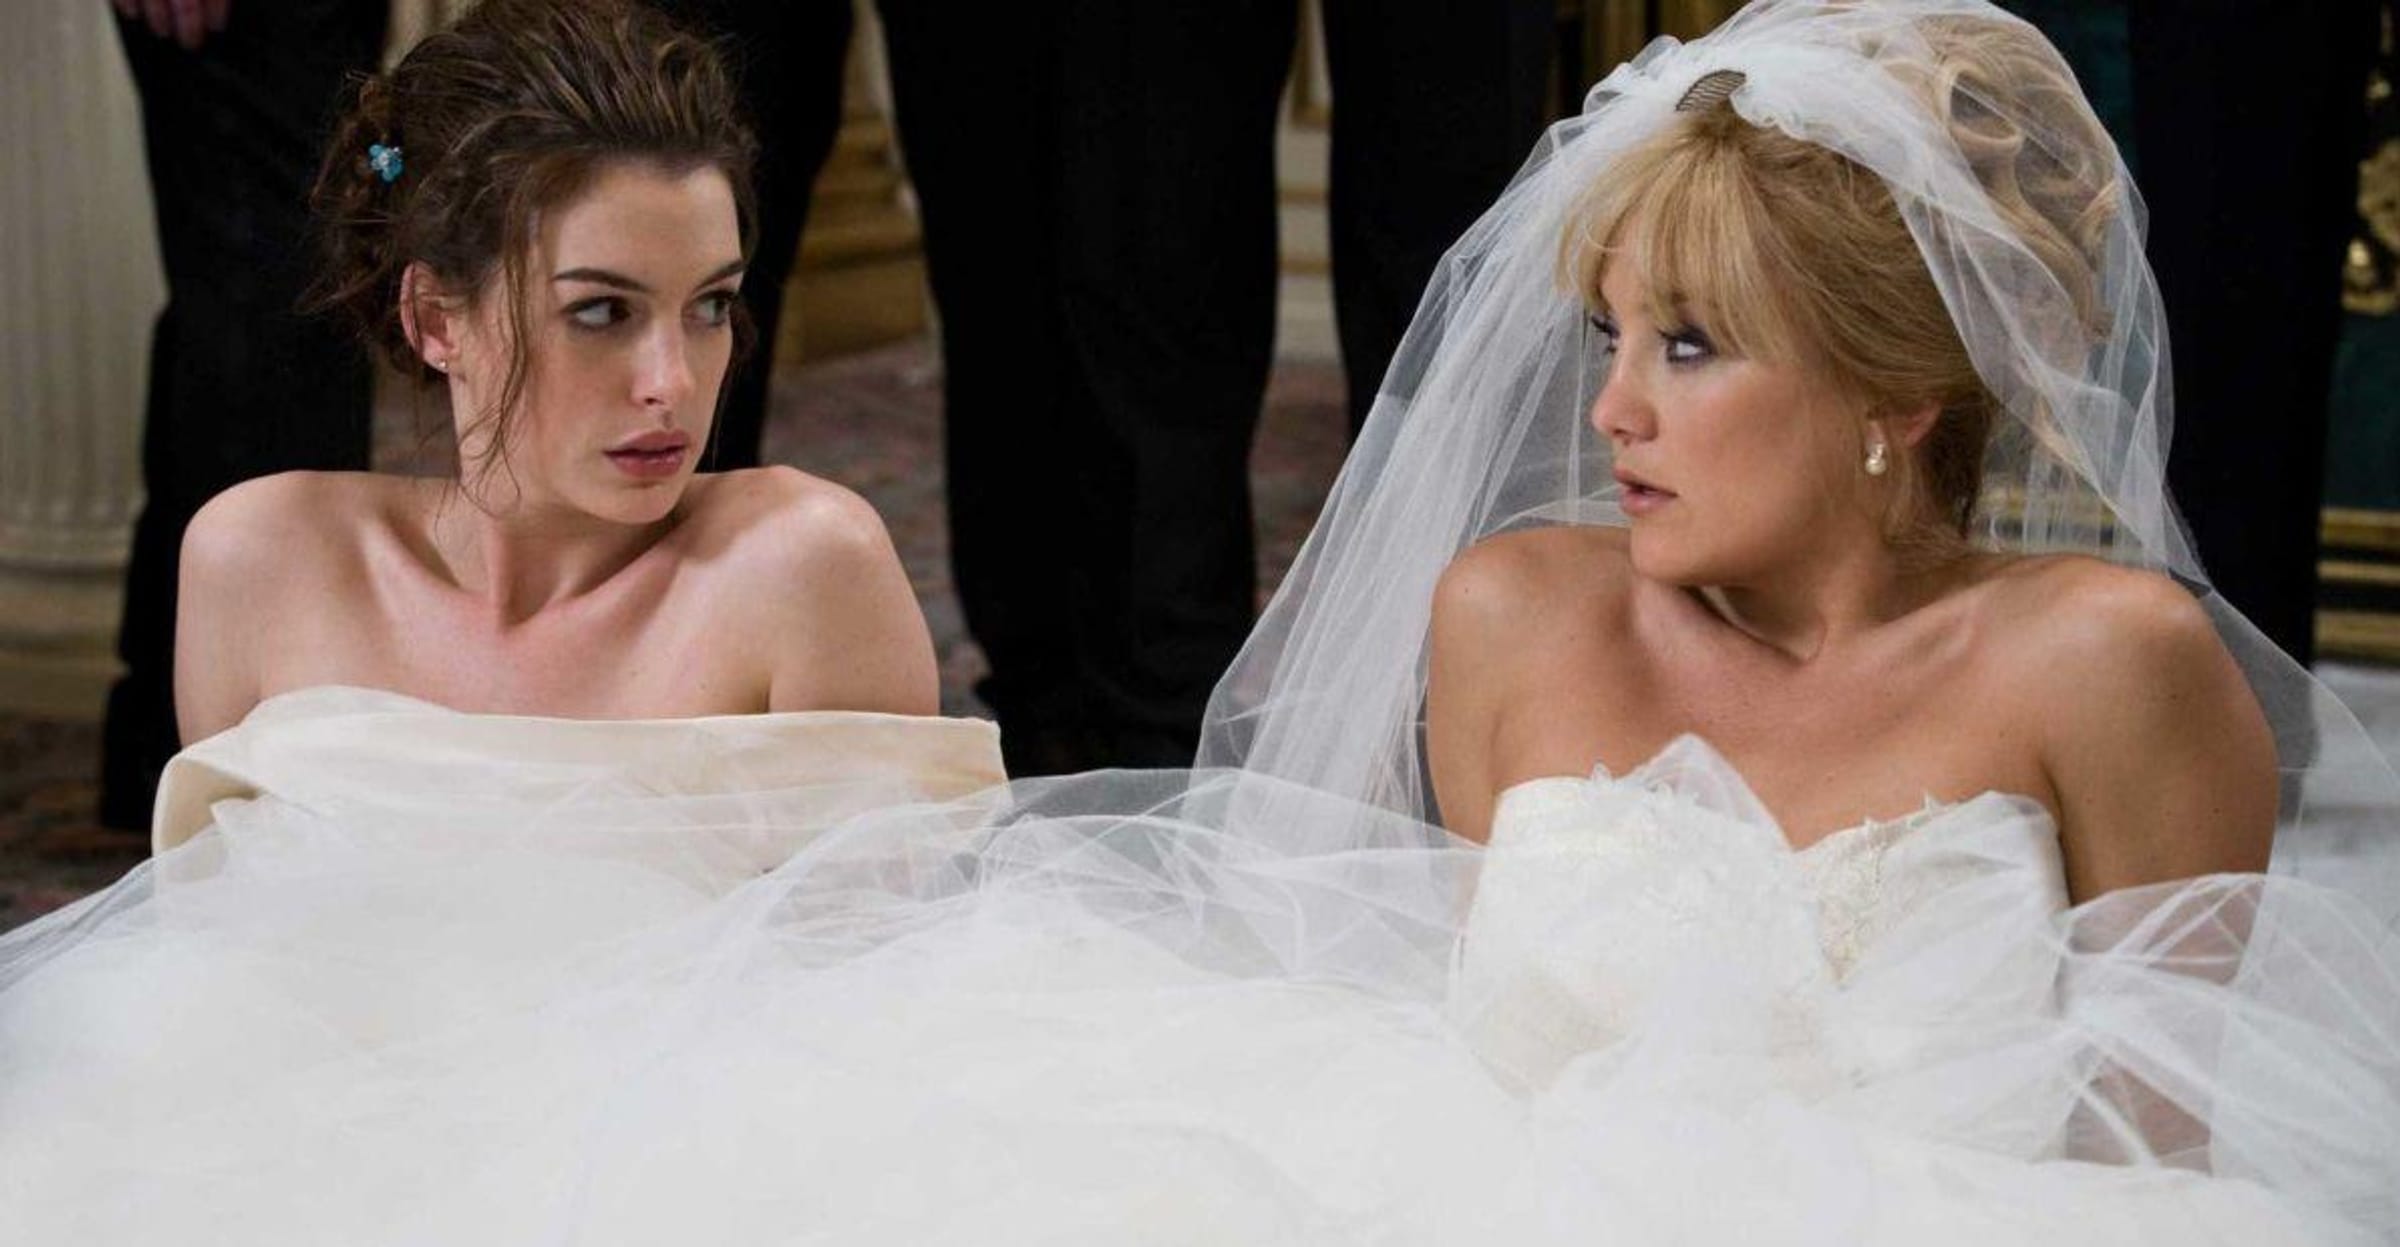 The Best and Worst Wedding Dresses That Have Been Worn in Movies